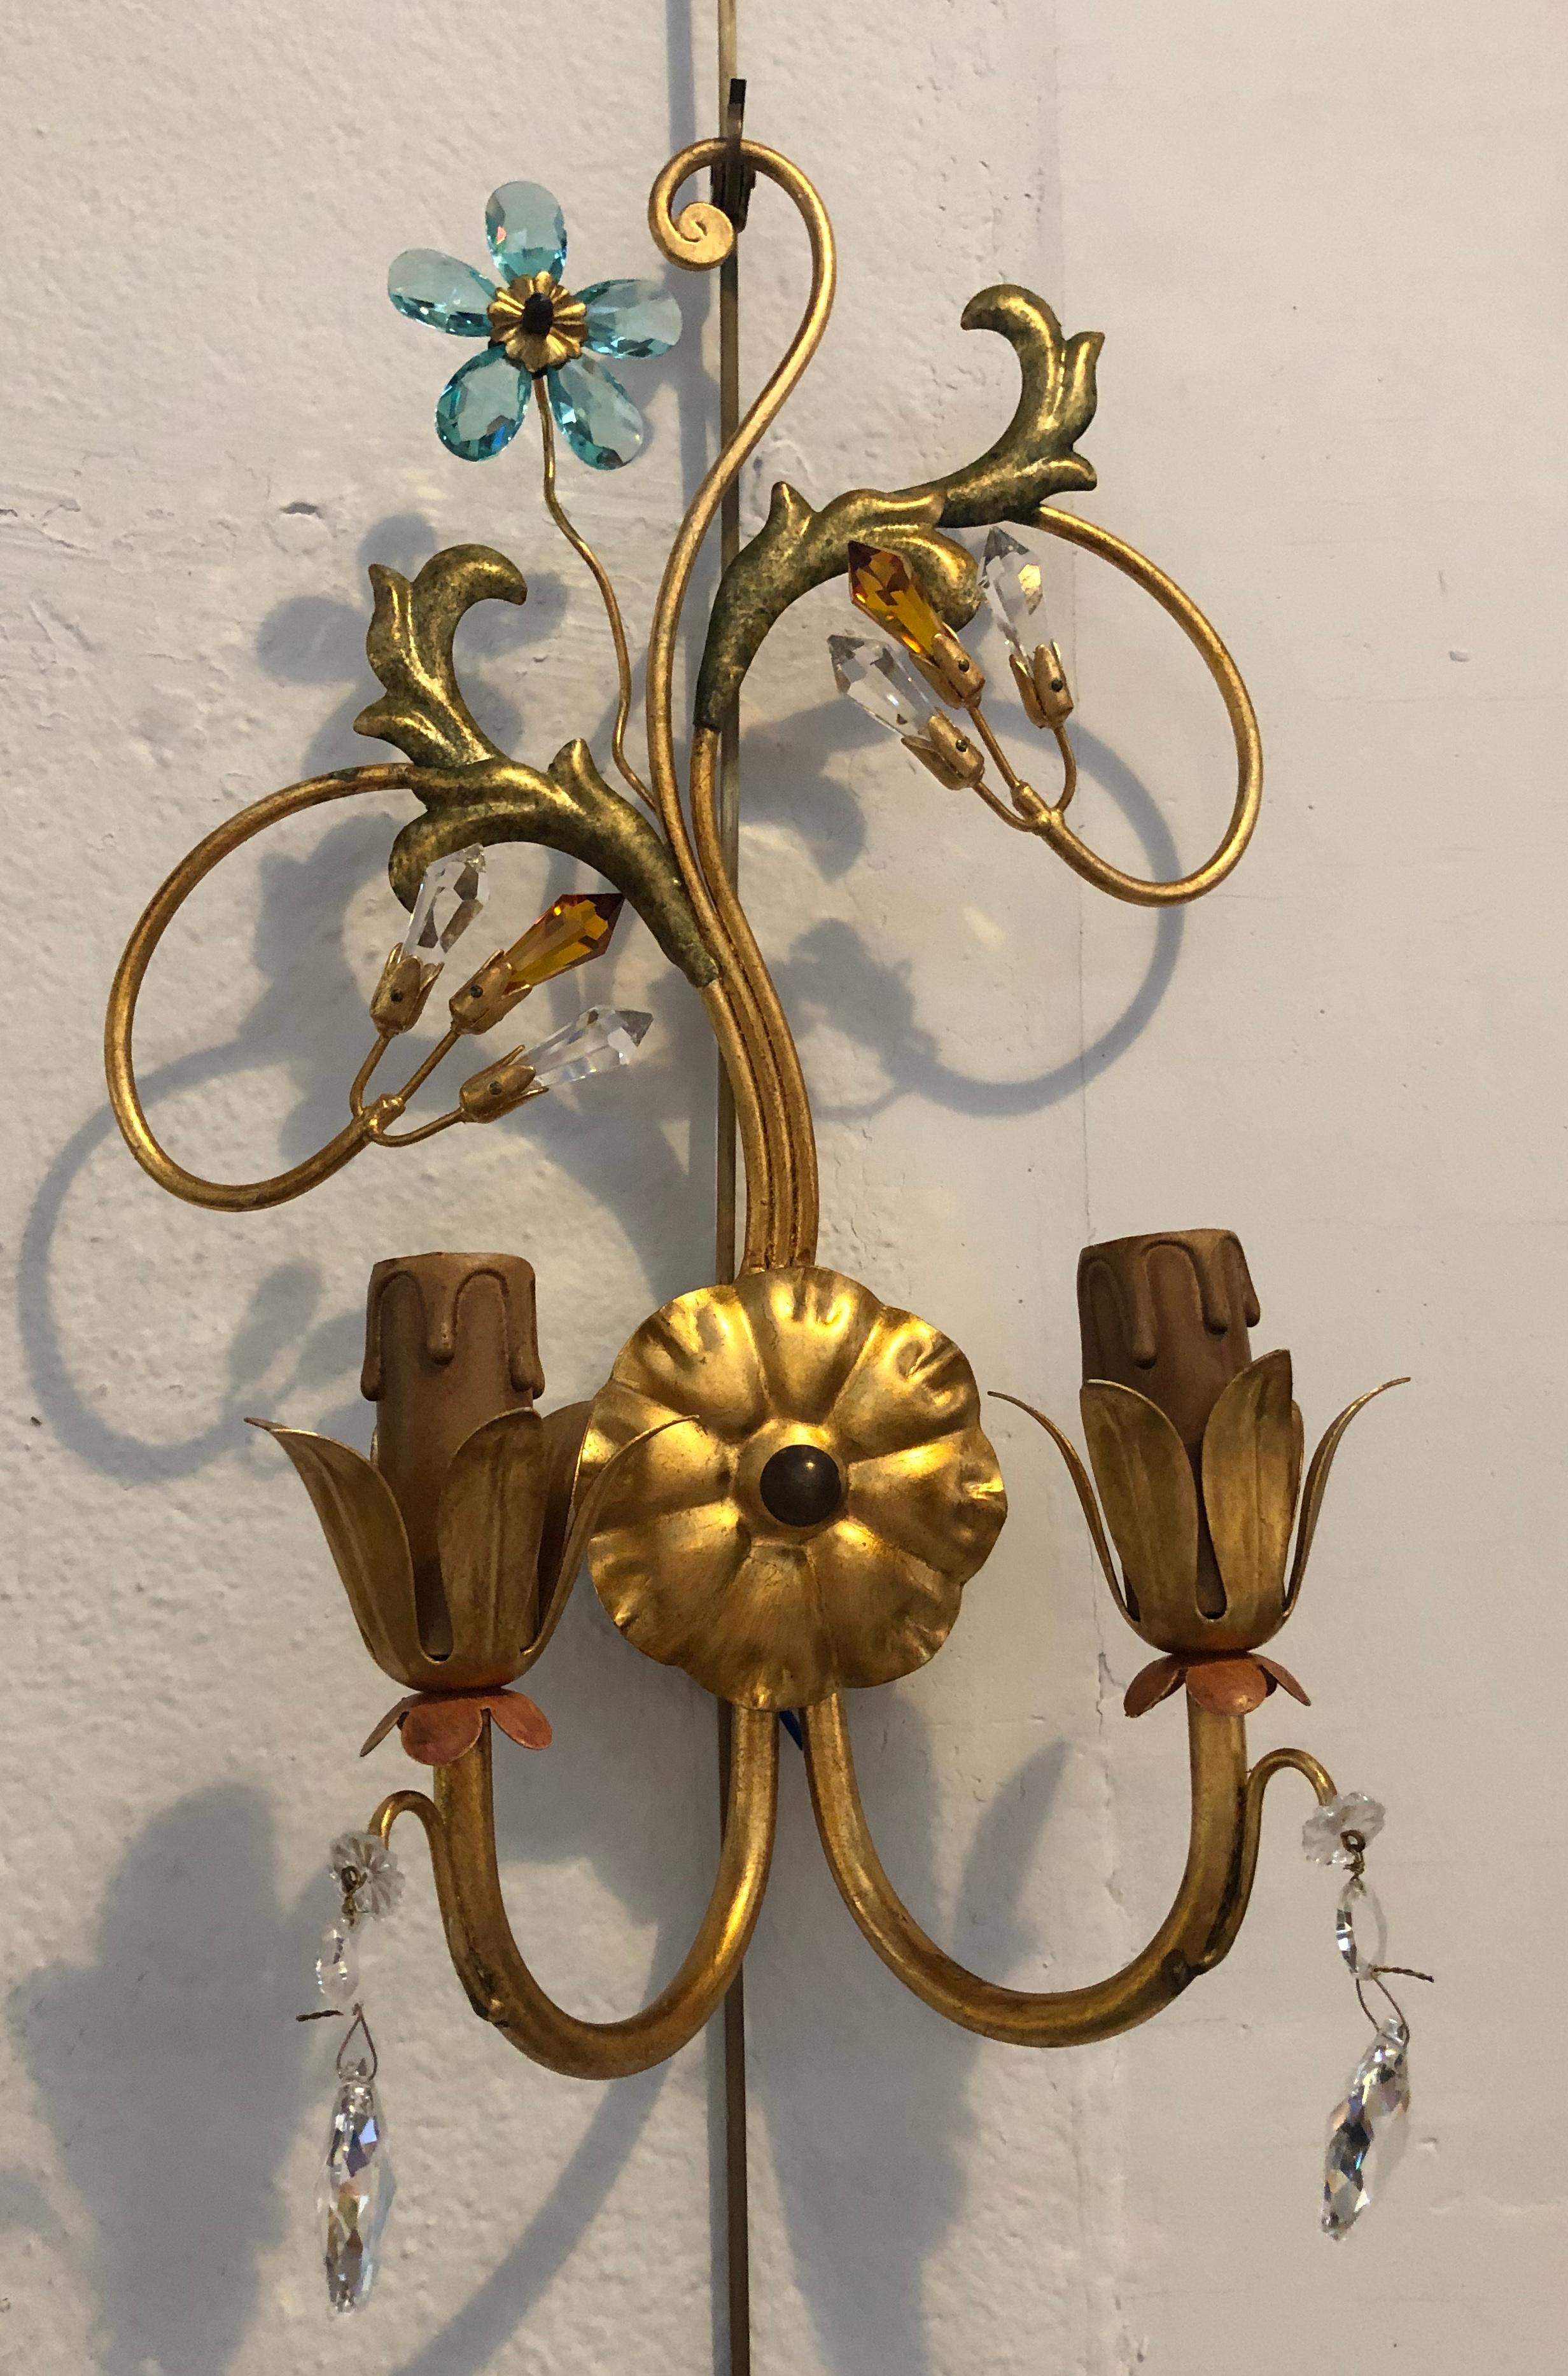 A pair of neoclassical handcrafted Italian gilt metal and crystal sconces by Alba Lamp Company.
Neoclassical handcrafted Italian gilt metal and crystal wall sconces having a matching Chandelier sold seperatly. This sleek and stylish murano crystal